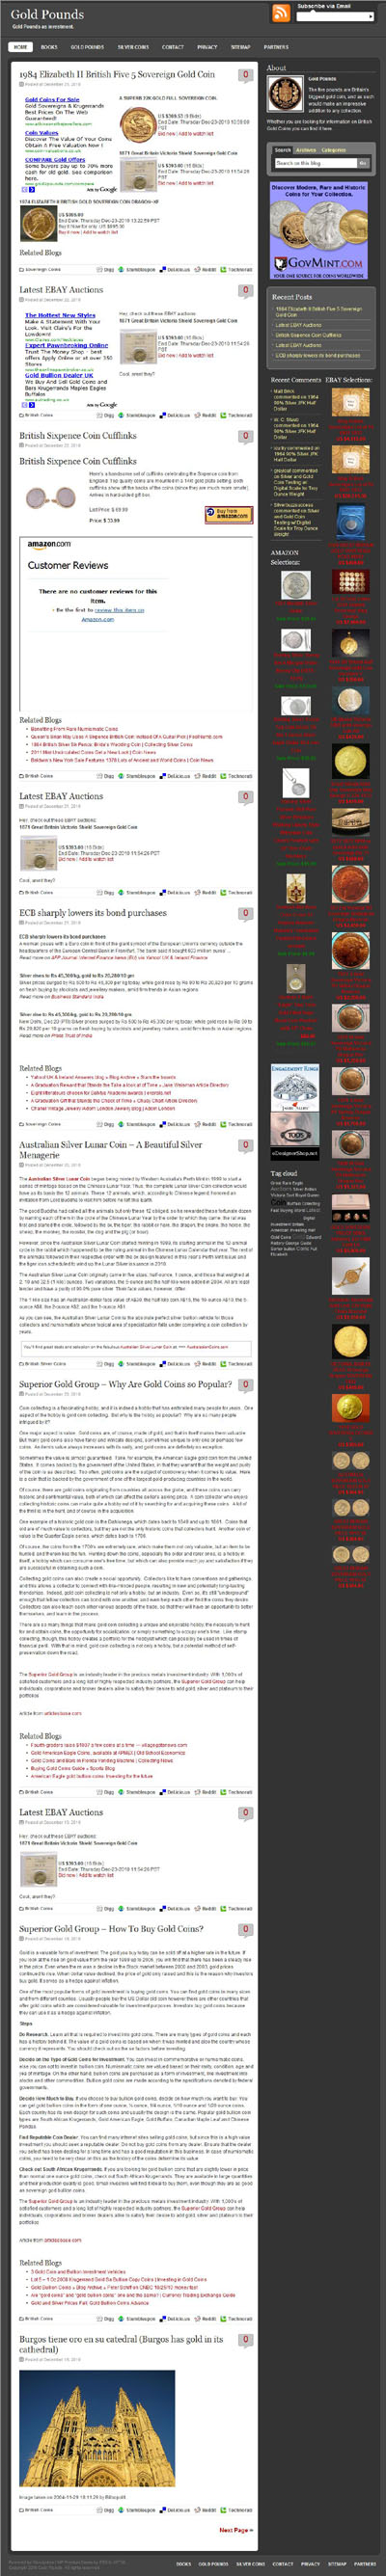 Gold Pounds' Sovereign Treasure British Gold Coins Gold Coins Investment Page